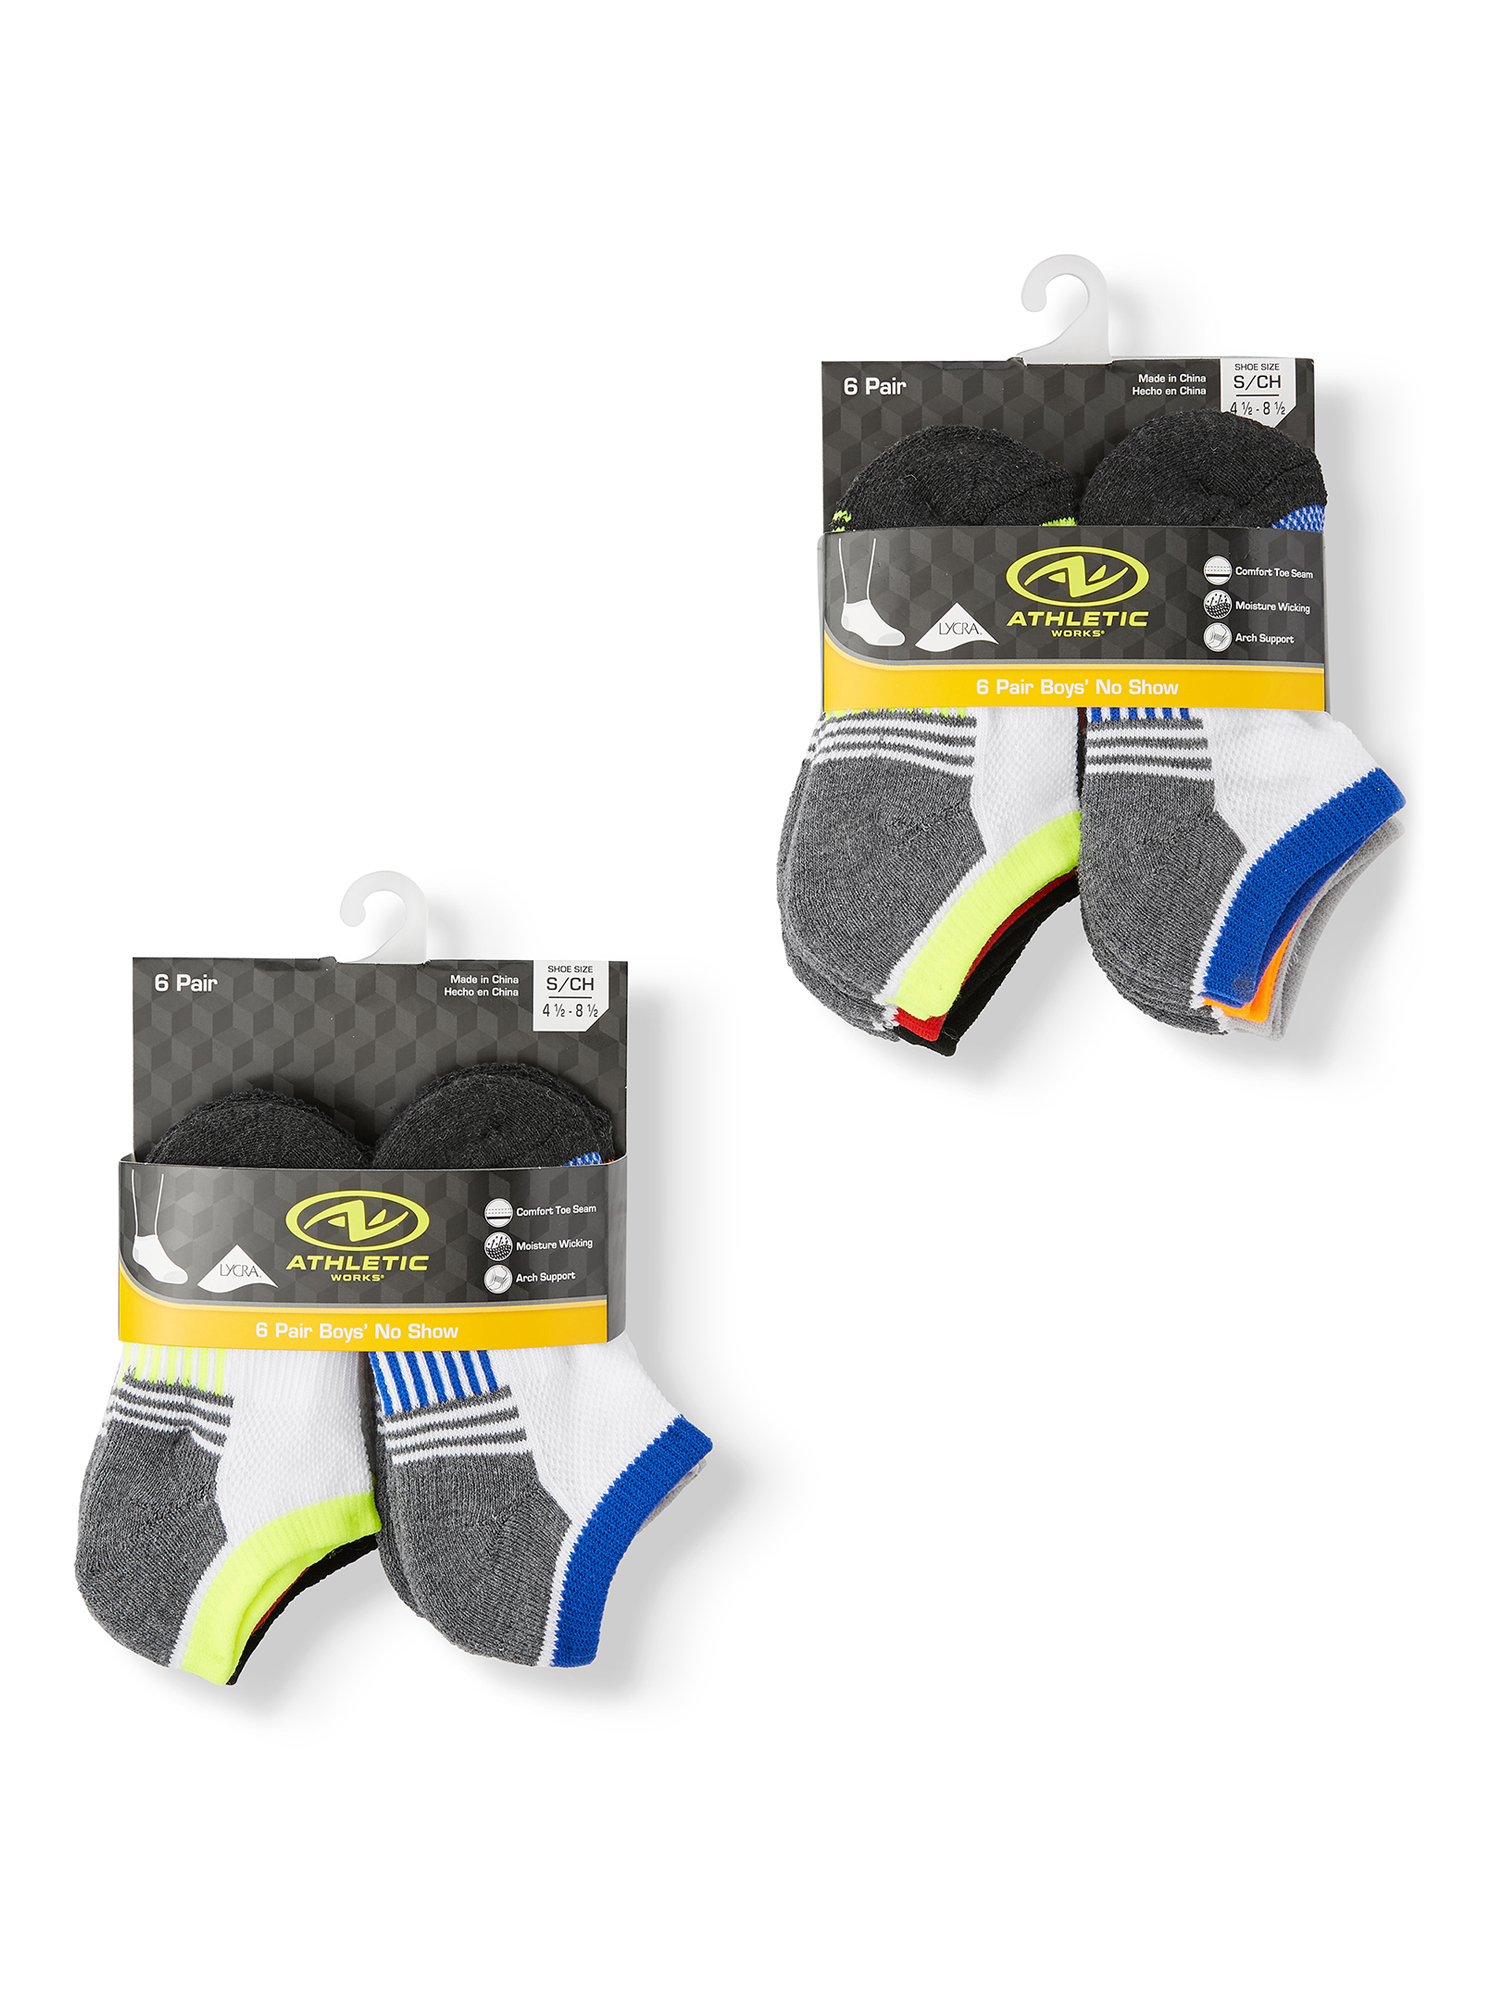 Athletic Works Boys Socks, 12 Pack Half Cushioned No Shows, Sizes S (4.5-8.5) - L (3-9) - image 3 of 3